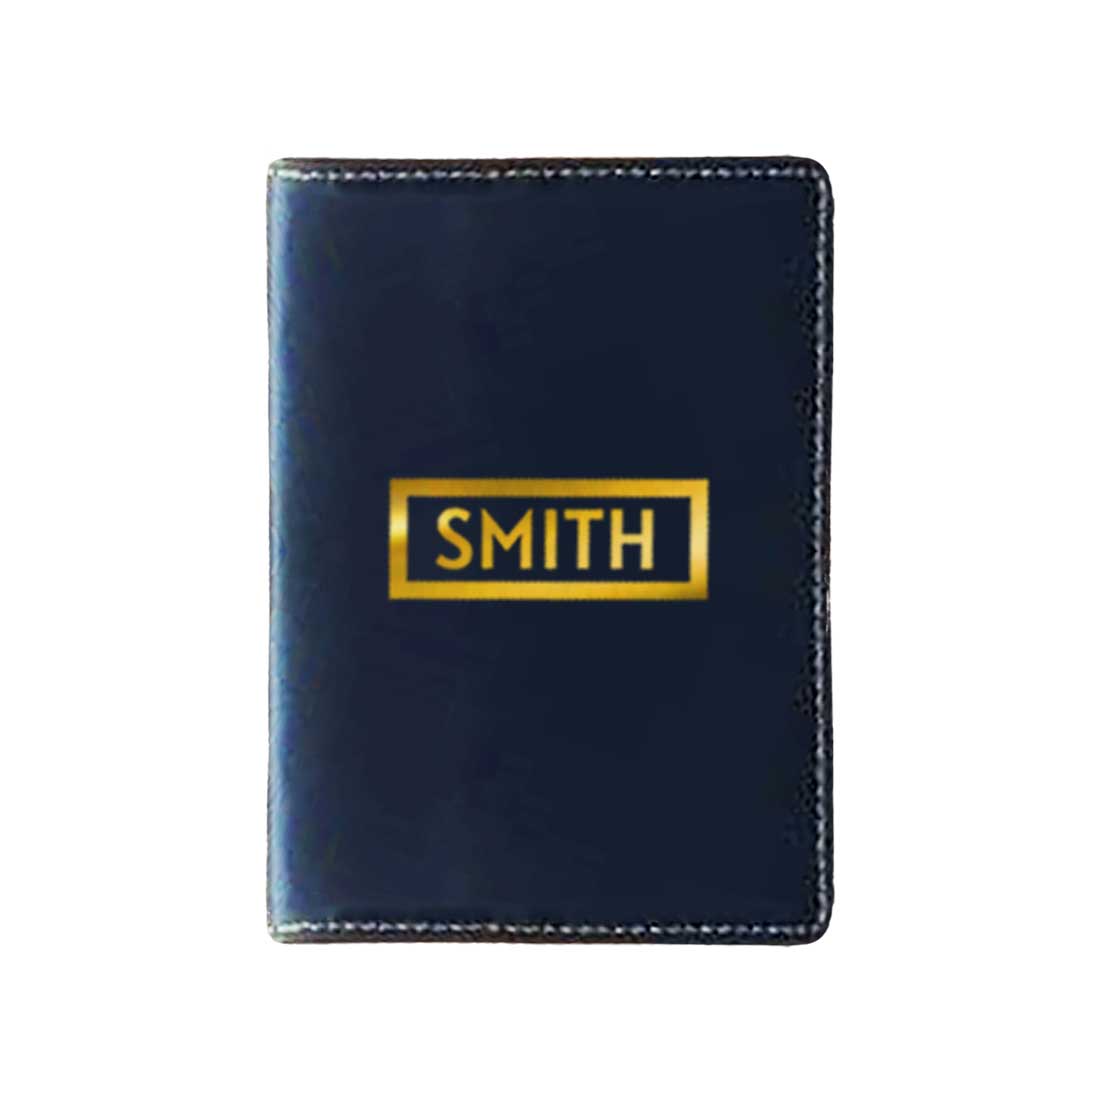 Personalized PU Leather Passport Holder With Name - Add Name